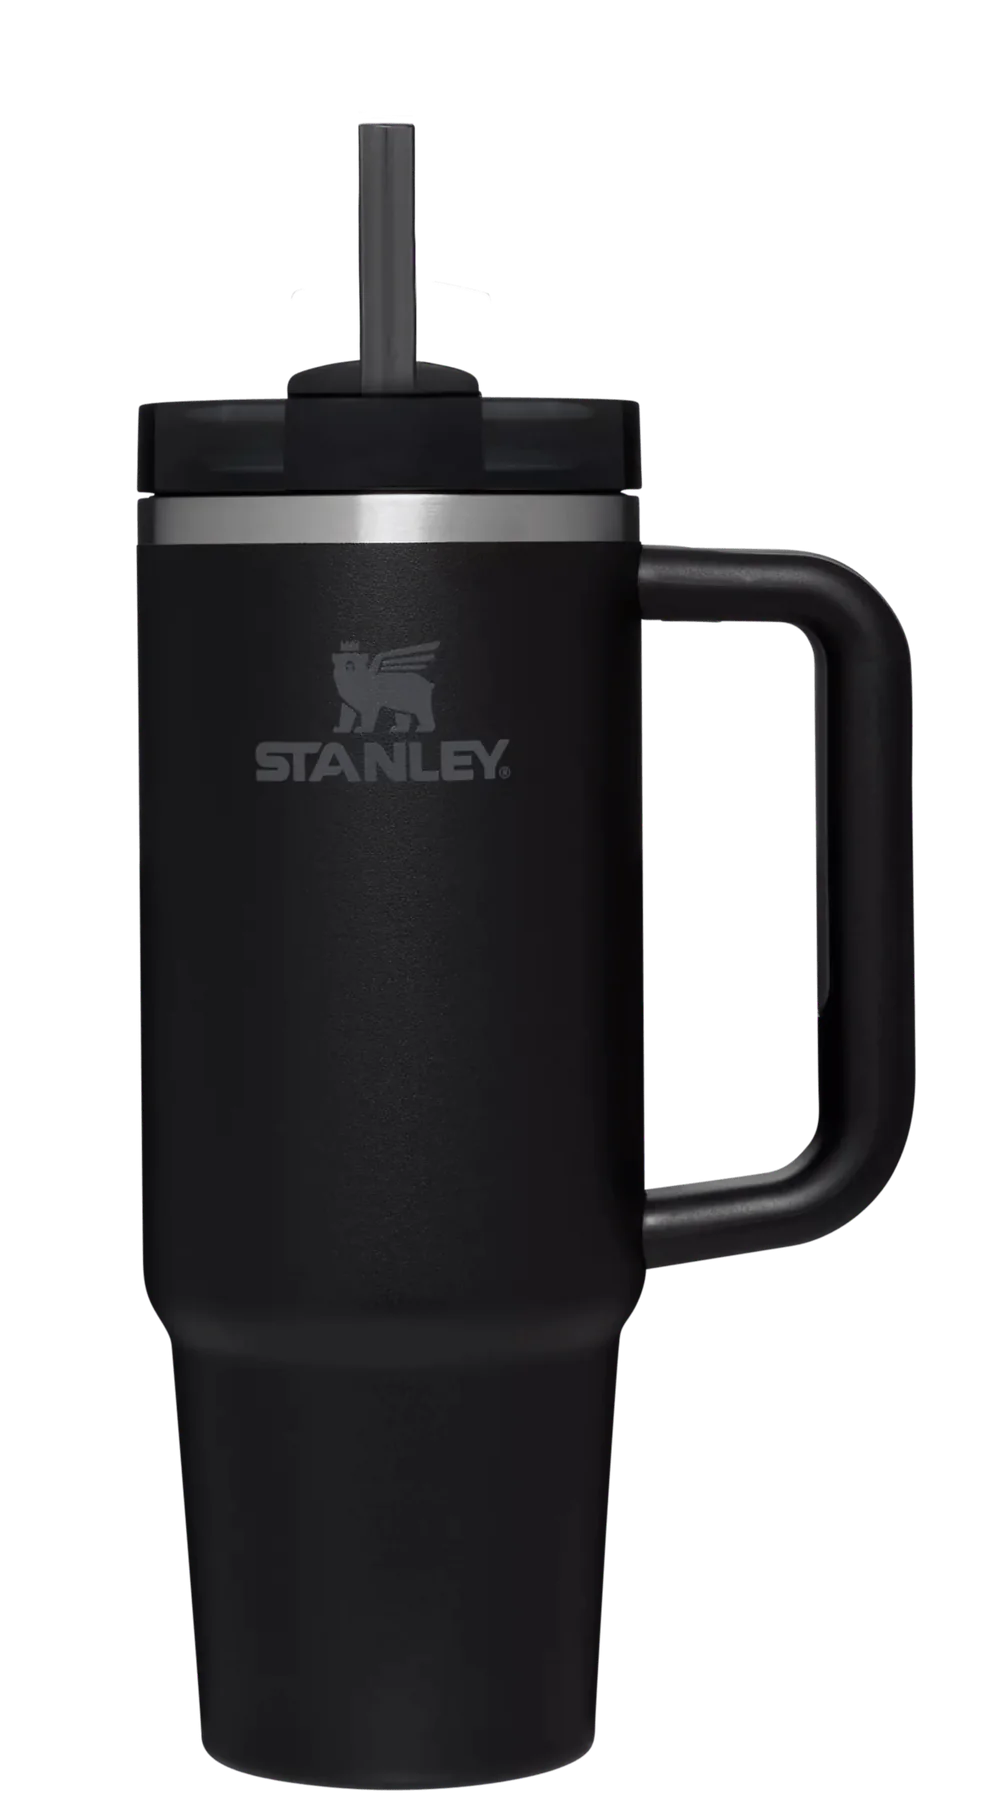 Etched4you ST  Stainless Steel Engraved Tumbler